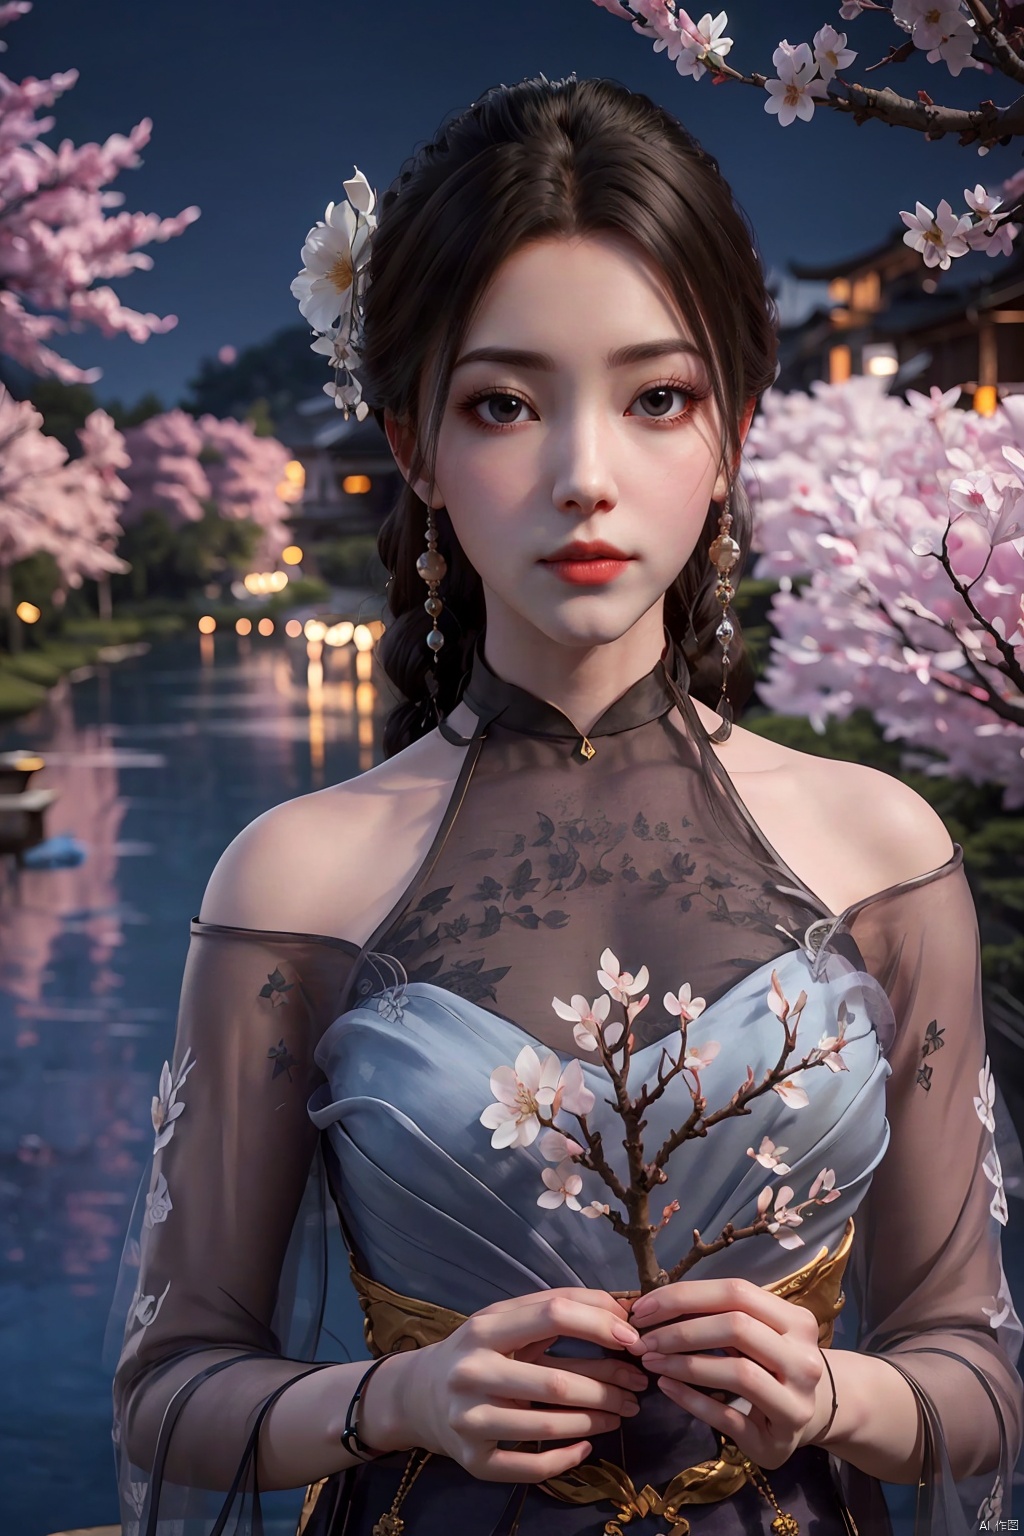  Upper body, panoramic view, exploring cherry blossom branches, fairyland, light blue elements, night, side light shining on the face,Xlujiejie